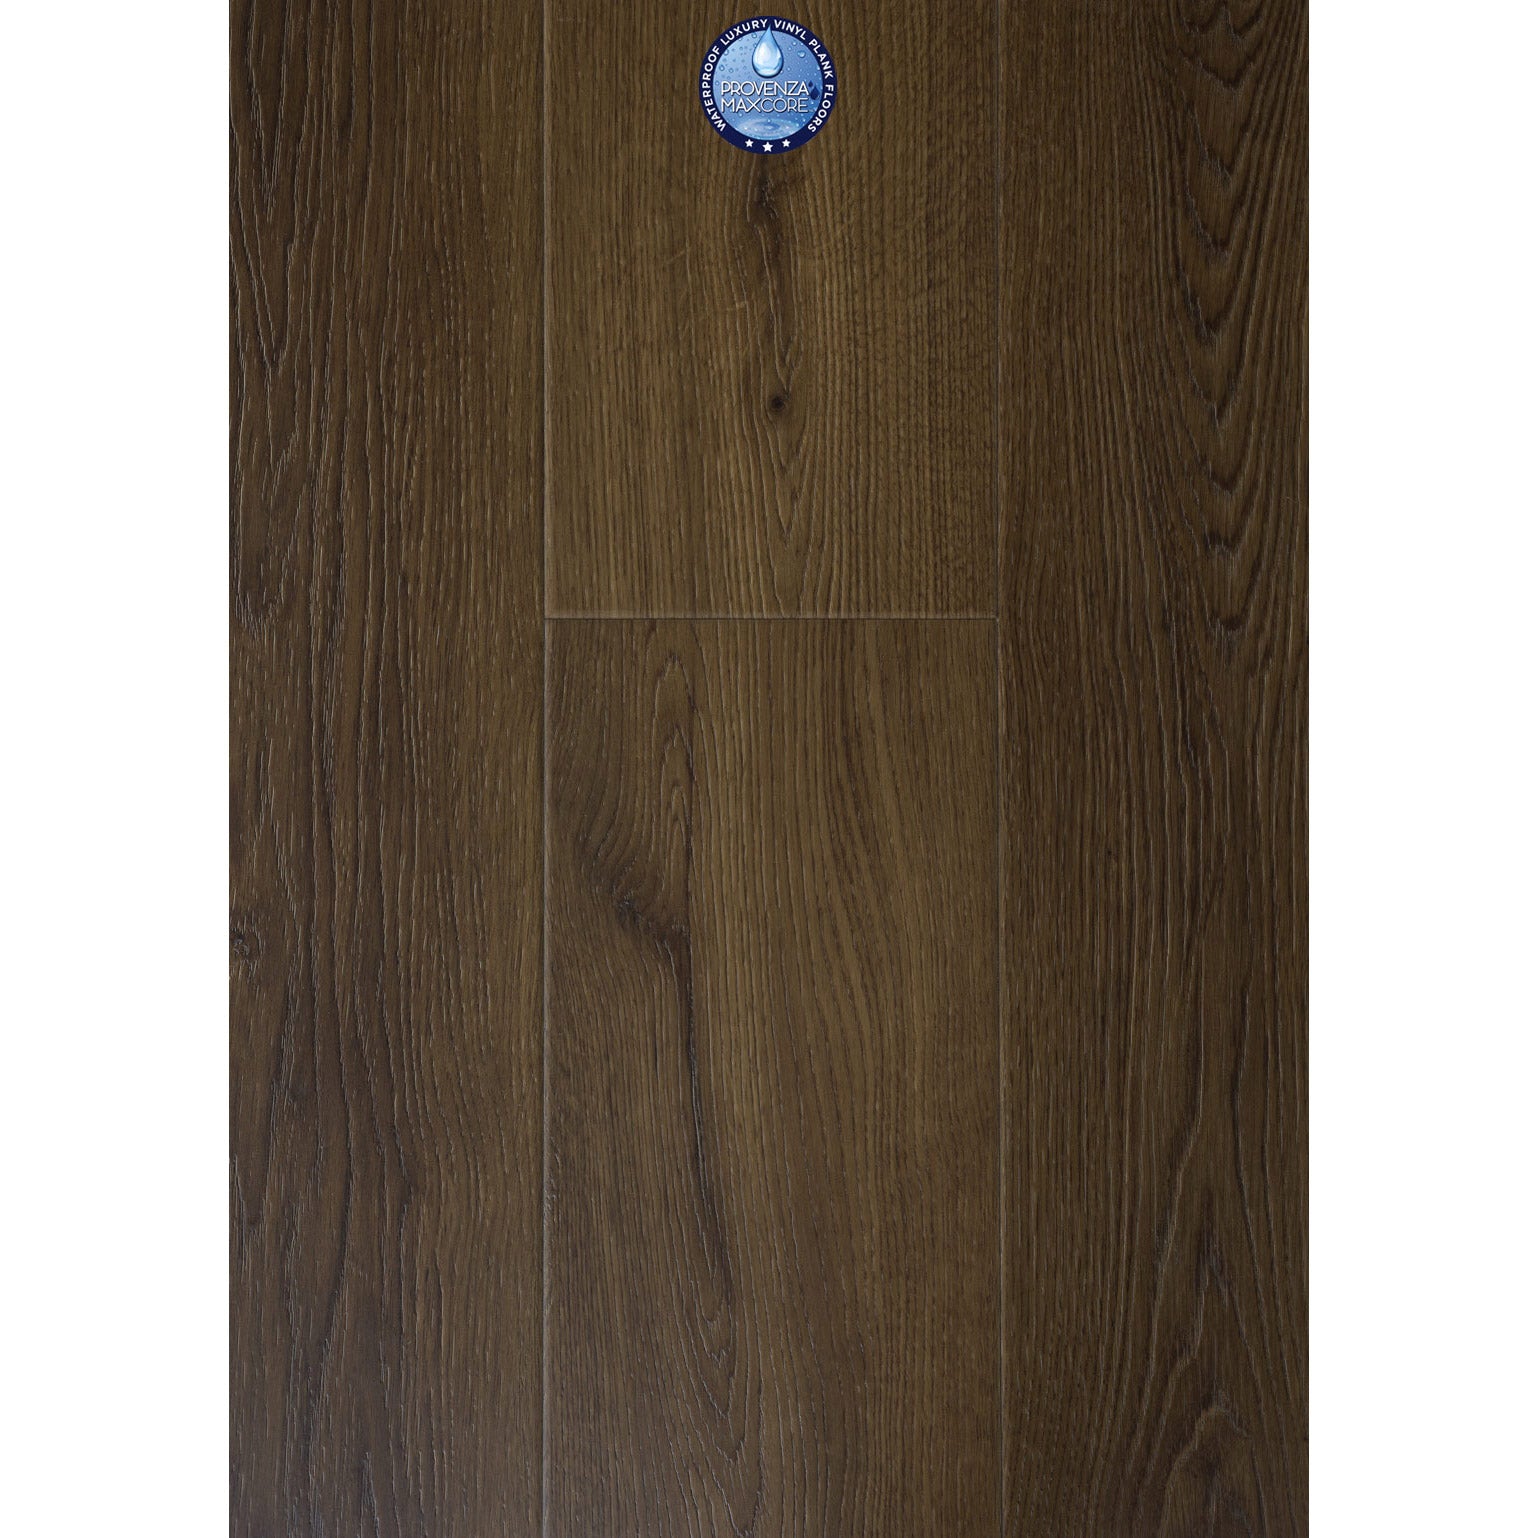 Provenza Floors - New Wave - 8.75 in. x 72 in. Rigid Core - Night Owl